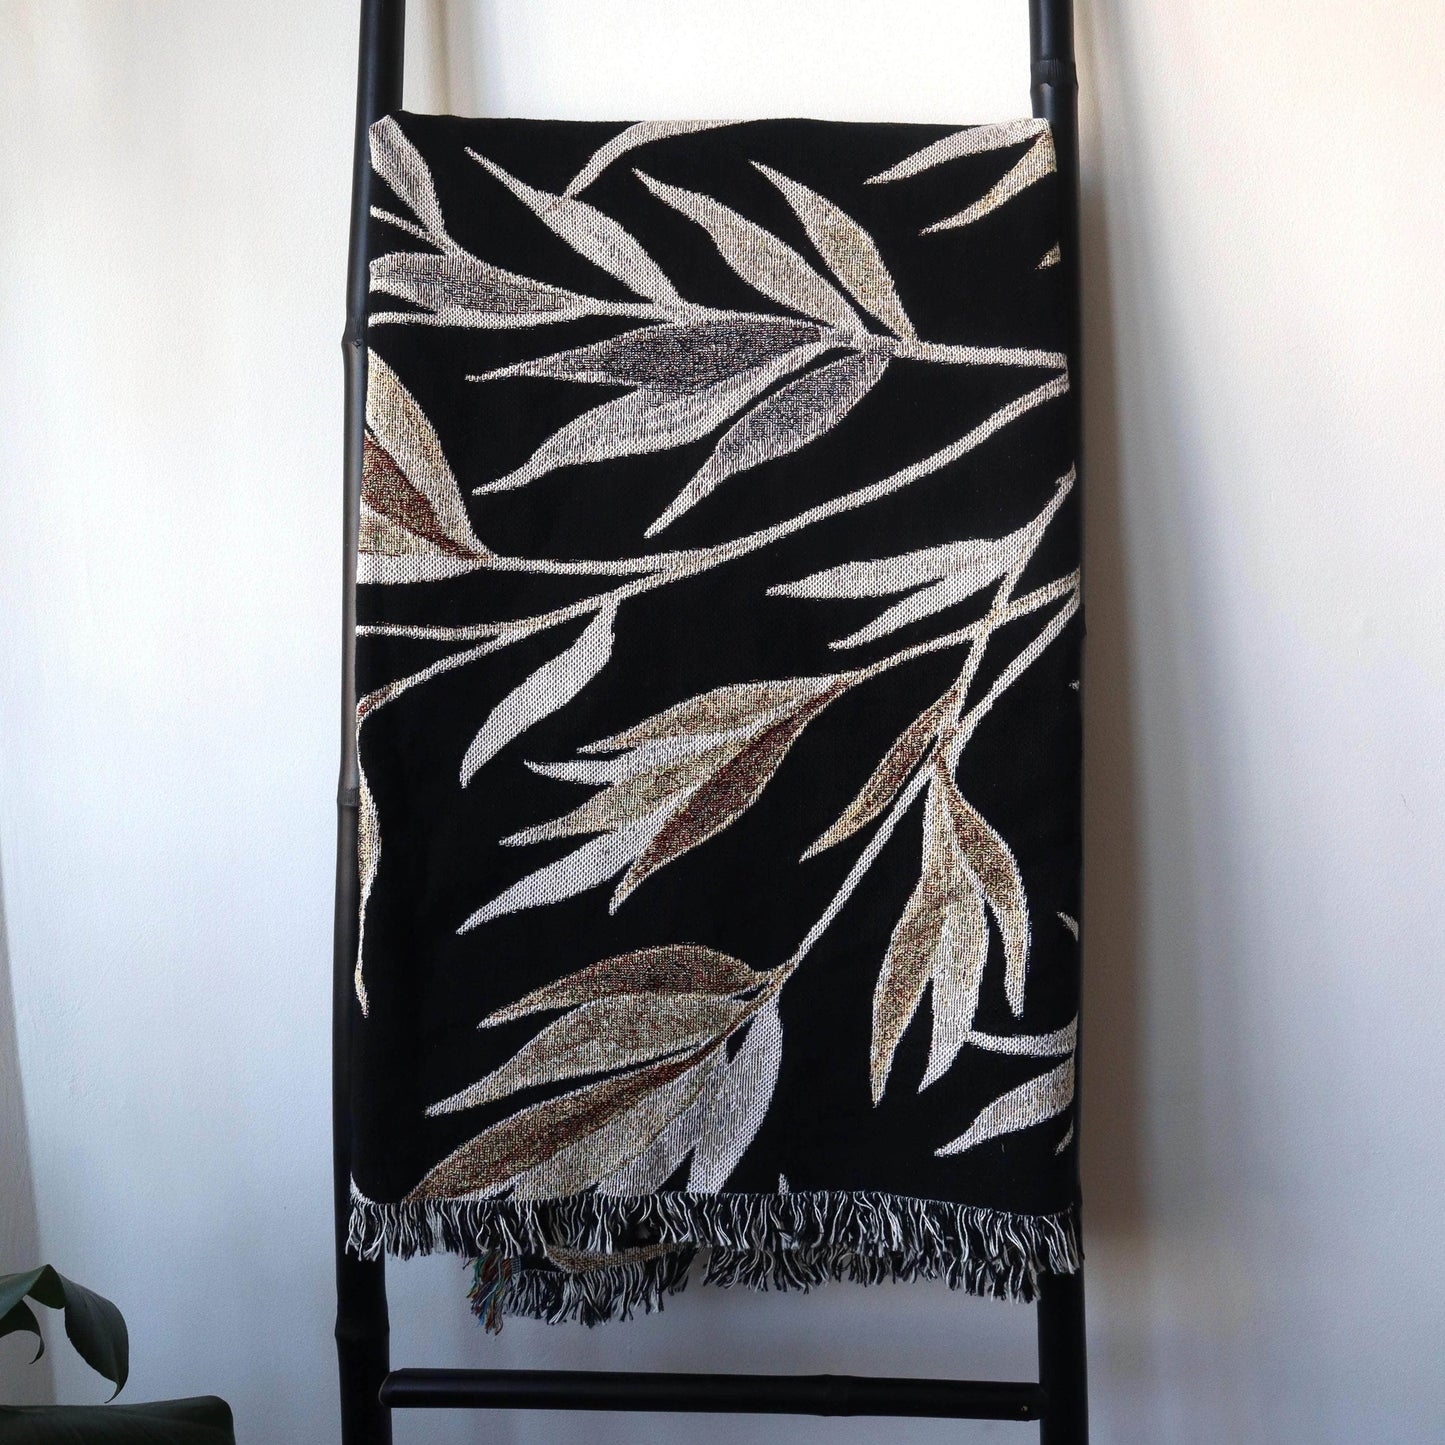 Growth Recycled Cotton Woven Throw - Black